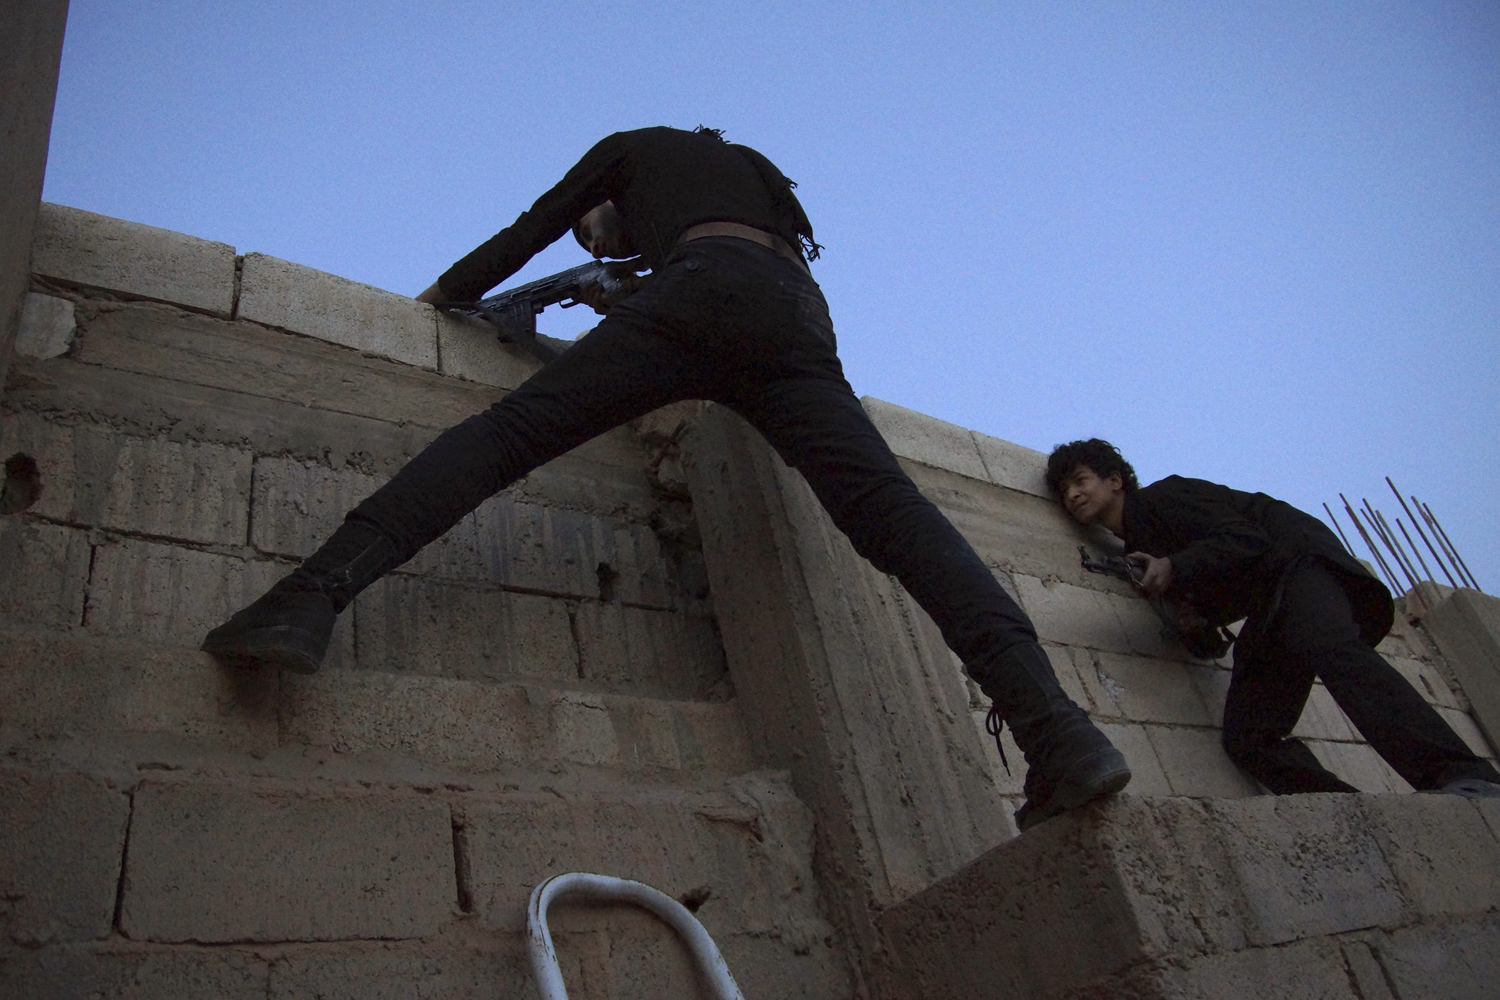 April 16, 2013. Free Syrian Army fighters take their position as one points his weapon from the top of a building in Deir al-Zor.